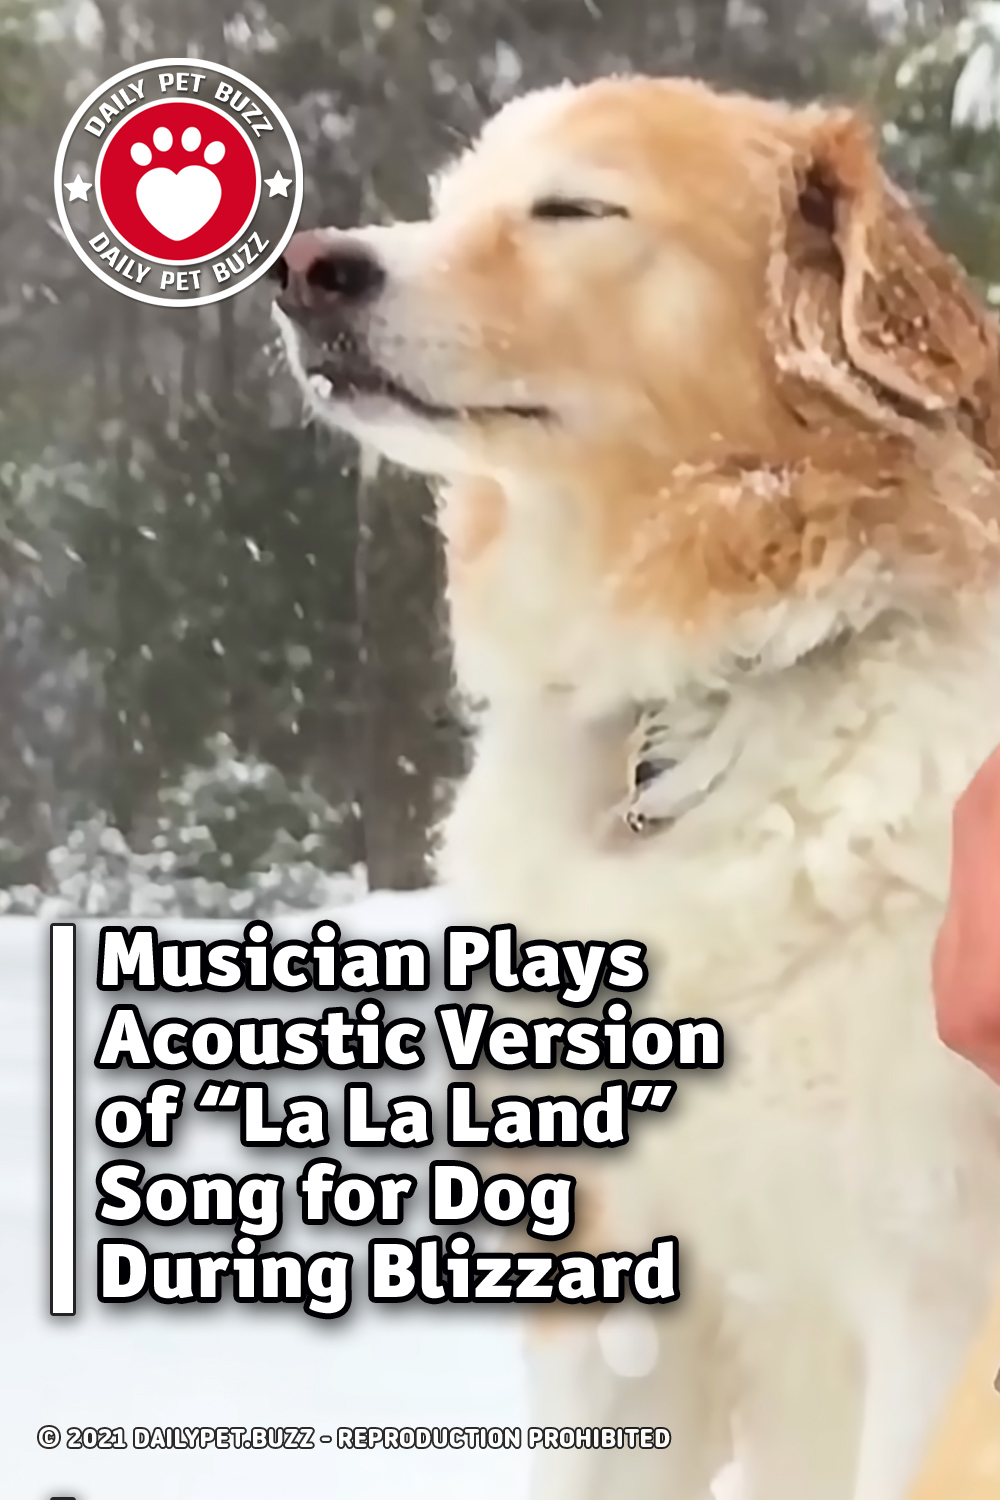 Musician Plays Acoustic Version of “La La Land” Song for Dog During Blizzard